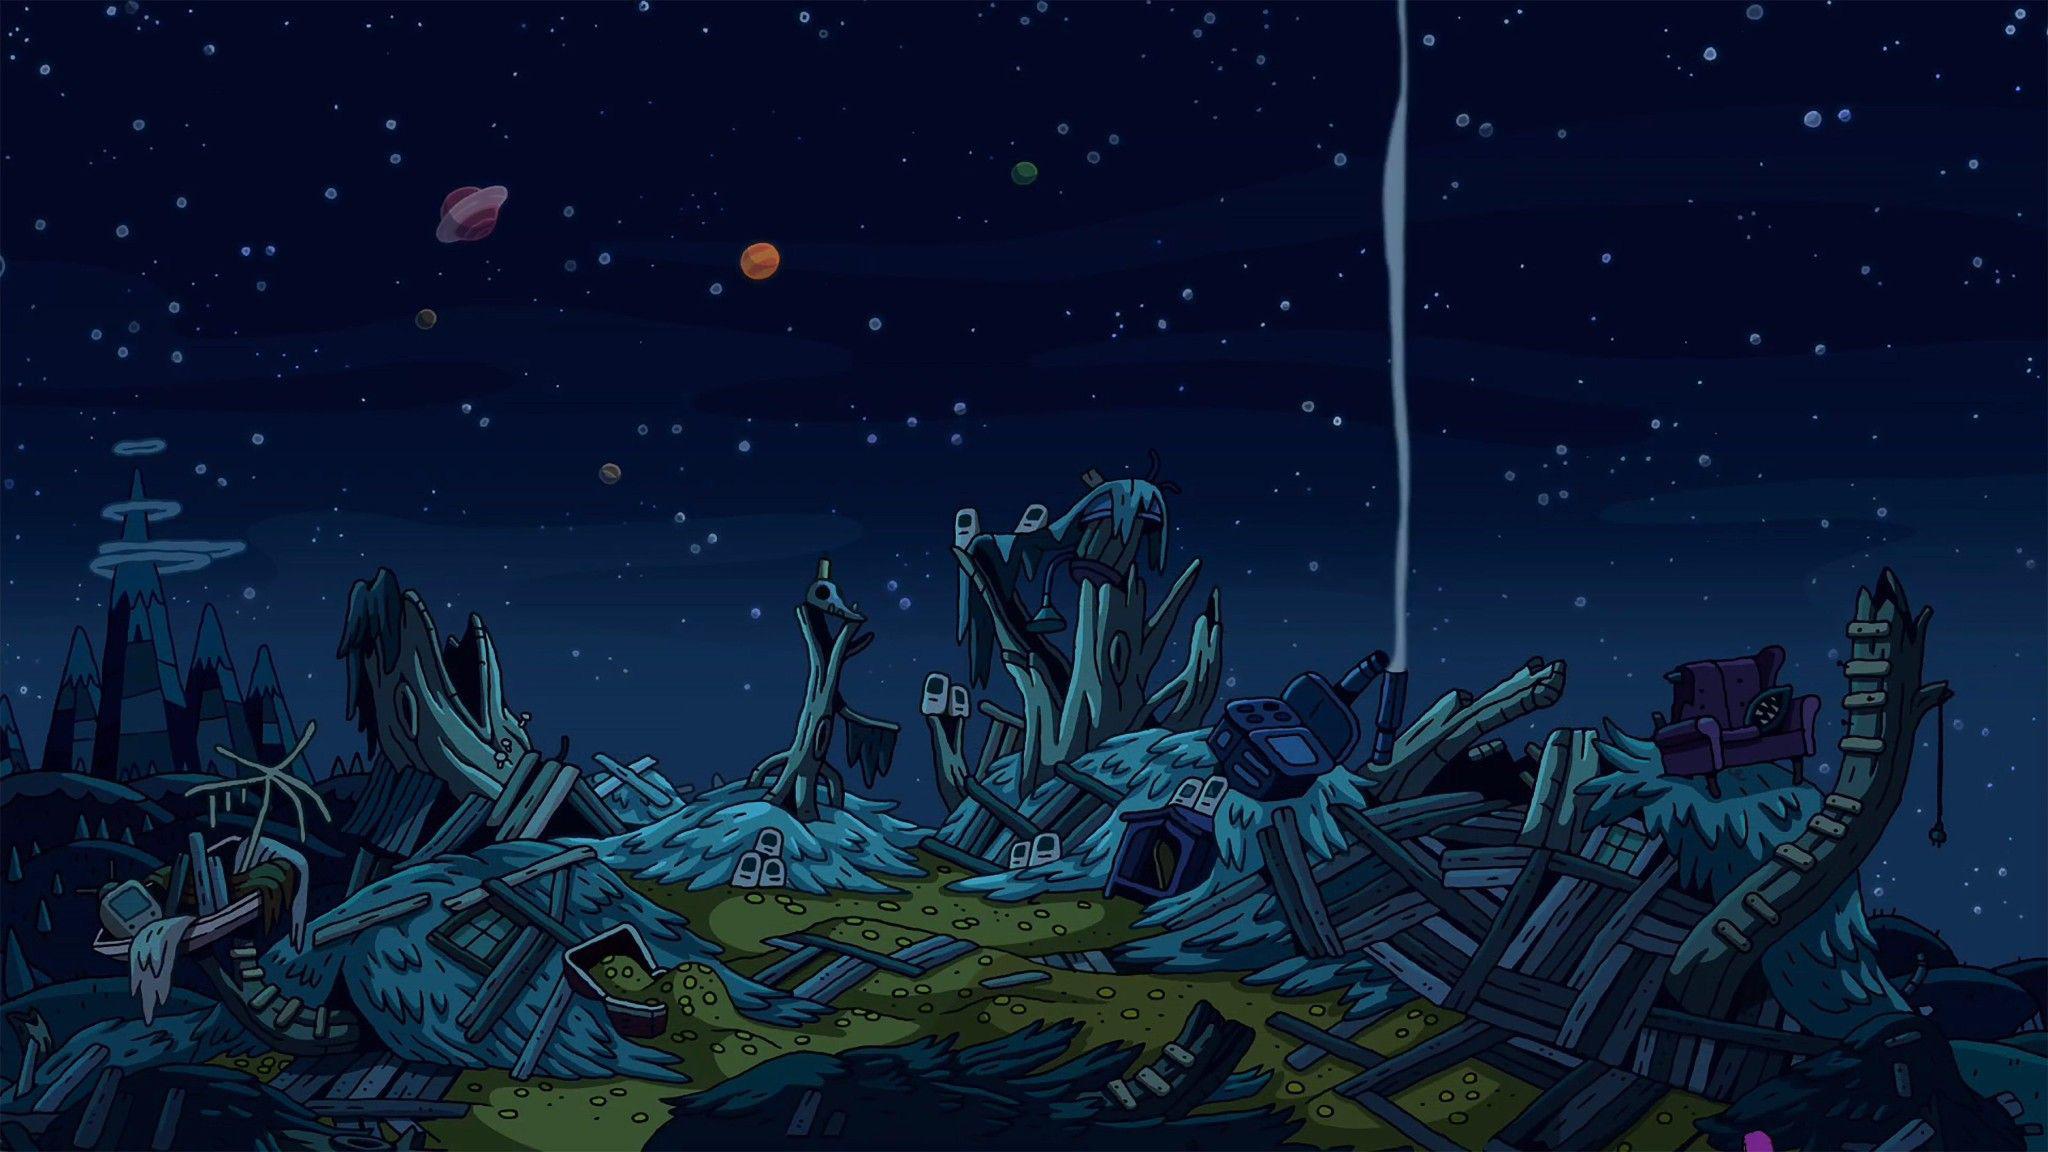 This is probably the most beautiful but sad picture I've ever seen from adventure time